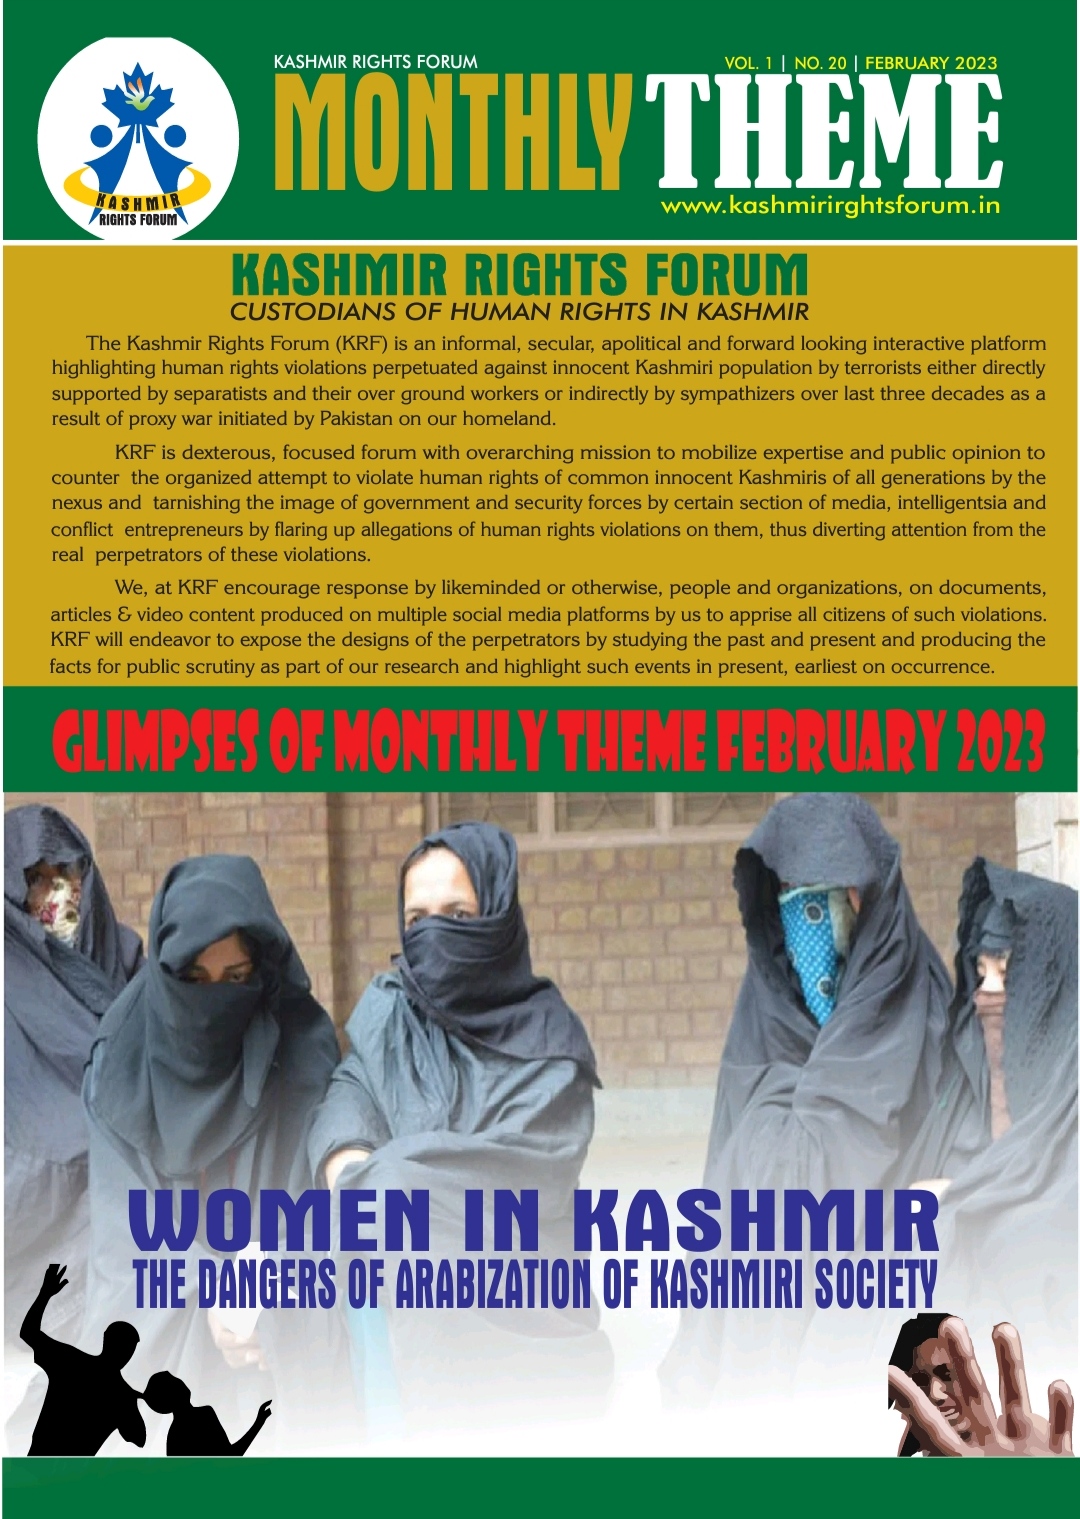 A preview of Monthly Theme February 2023. A detailed report on The Dangers of Arabization in Kashmir and condition of women in kashmir.